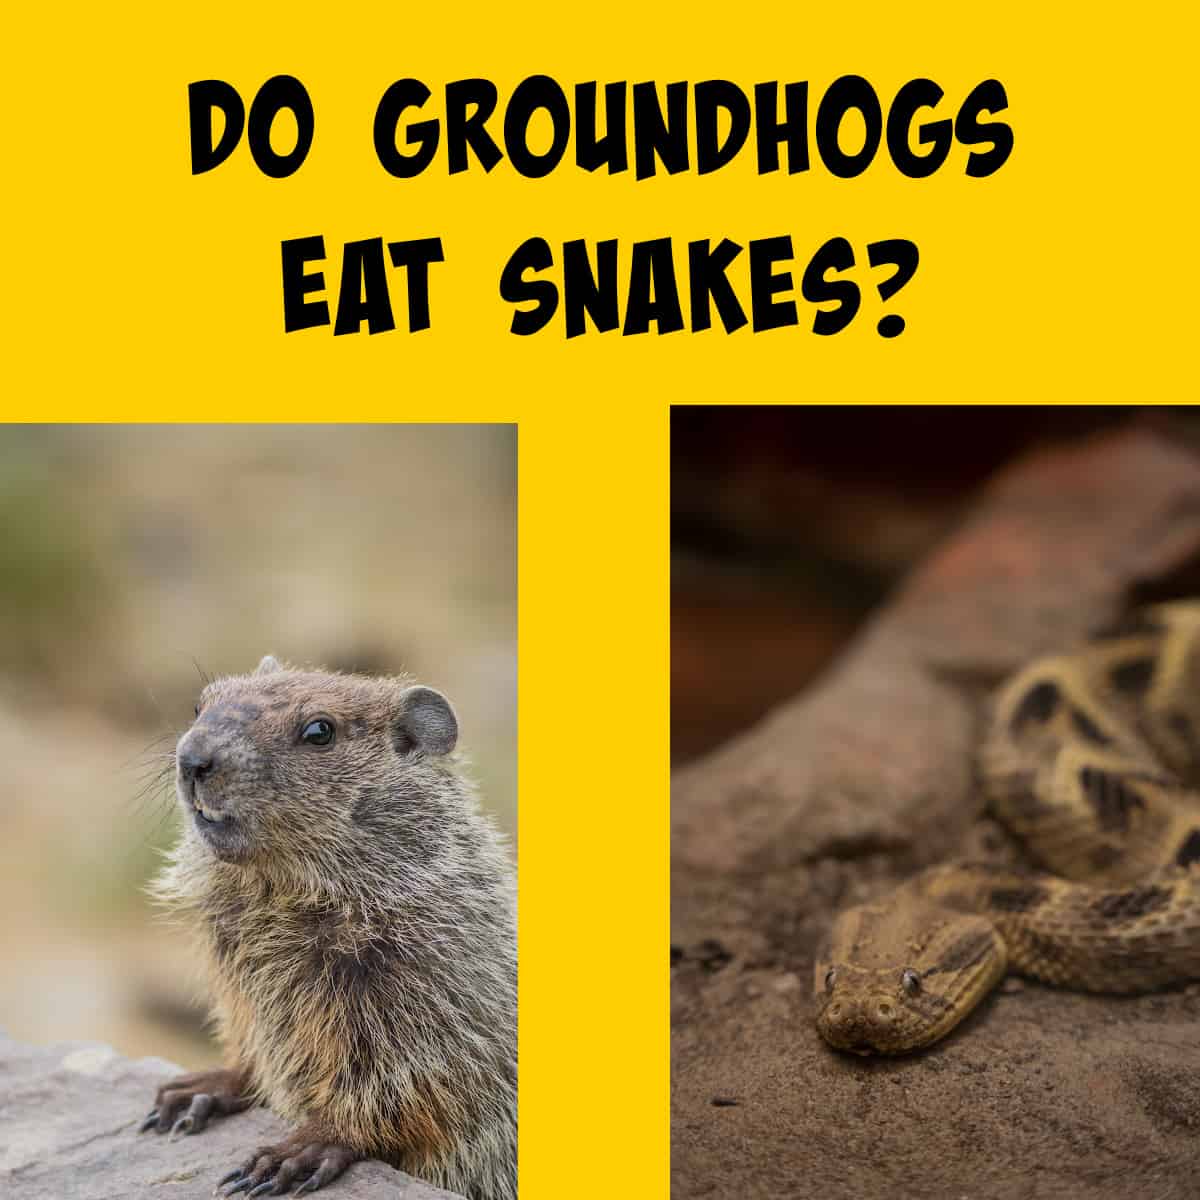 Picture of a groundhog and a snake